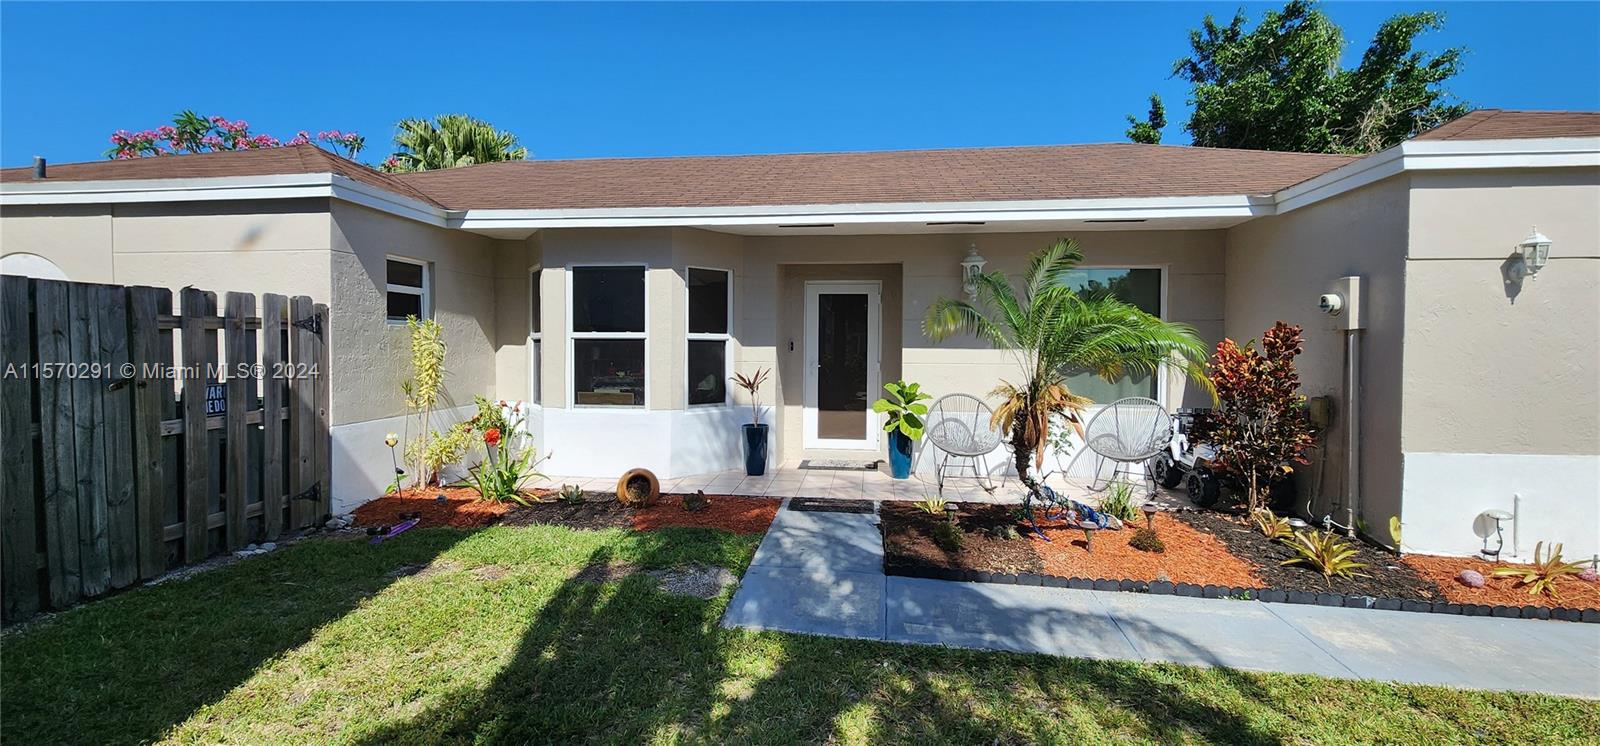 Welcome to your cozy haven in beautiful Cutler Bay! This charming 3-bed, 2-bath home is perfect for families seeking comfort and convenience. With spacious living areas and plenty of natural light, it's great for gatherings or just relaxing. Remodeled and ready to make it your own. There's a community pool and walking paths for outdoor fun. Plus, you're only 45 minutes from the Florida Keys for weekend adventures! Enjoy the laid-back lifestyle you've been dreaming of in this lovely neighborhood.